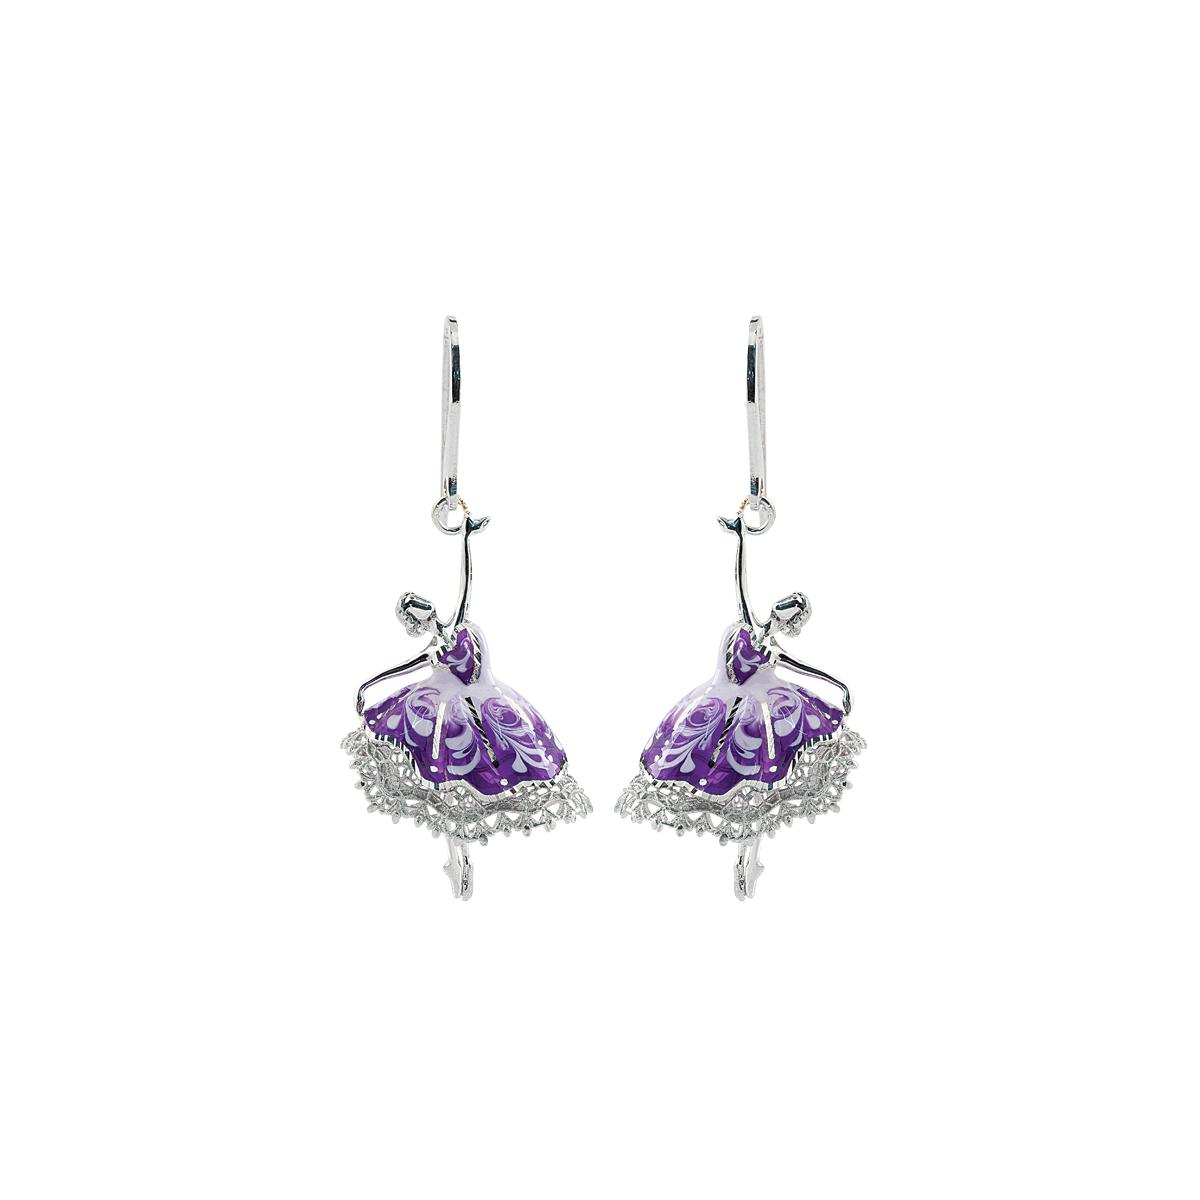 Ballerina earrings in 925 silver, rhodium-plated, with purple hand-made enamel - ZOR1116-MB